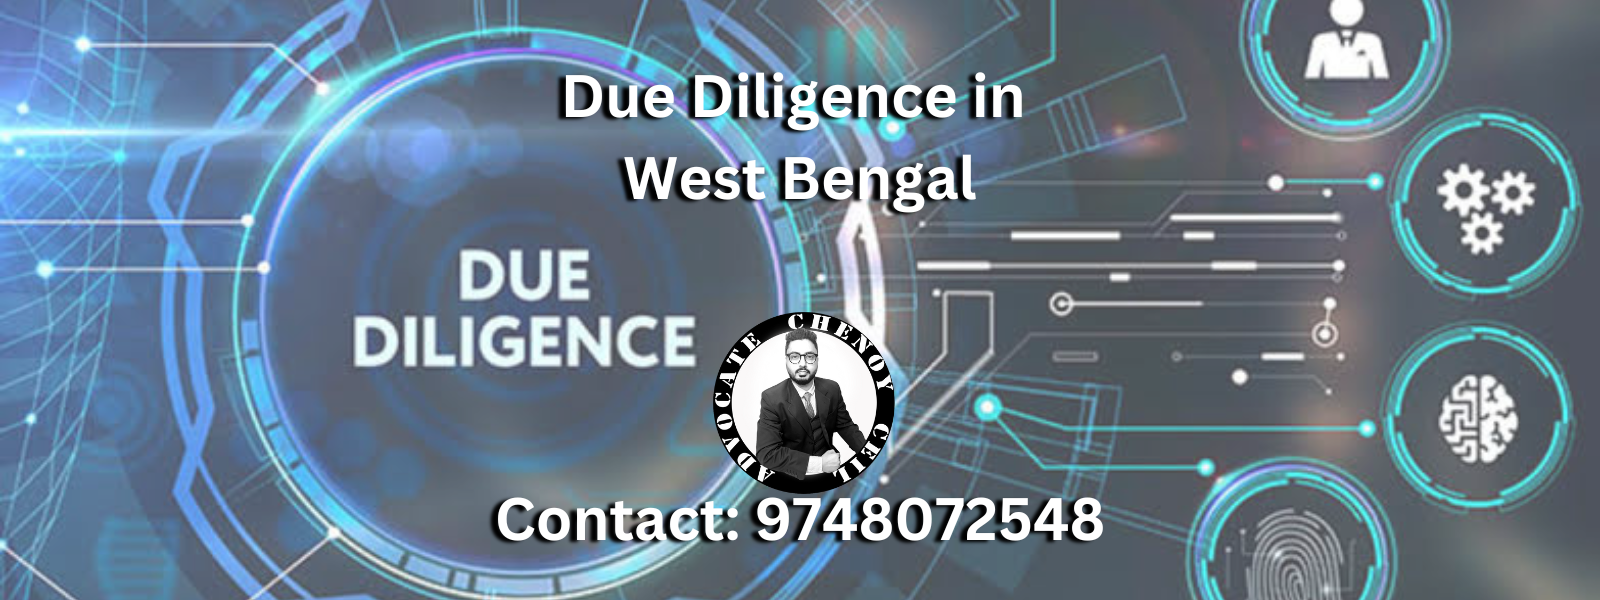 Due Diligence before Buying Property